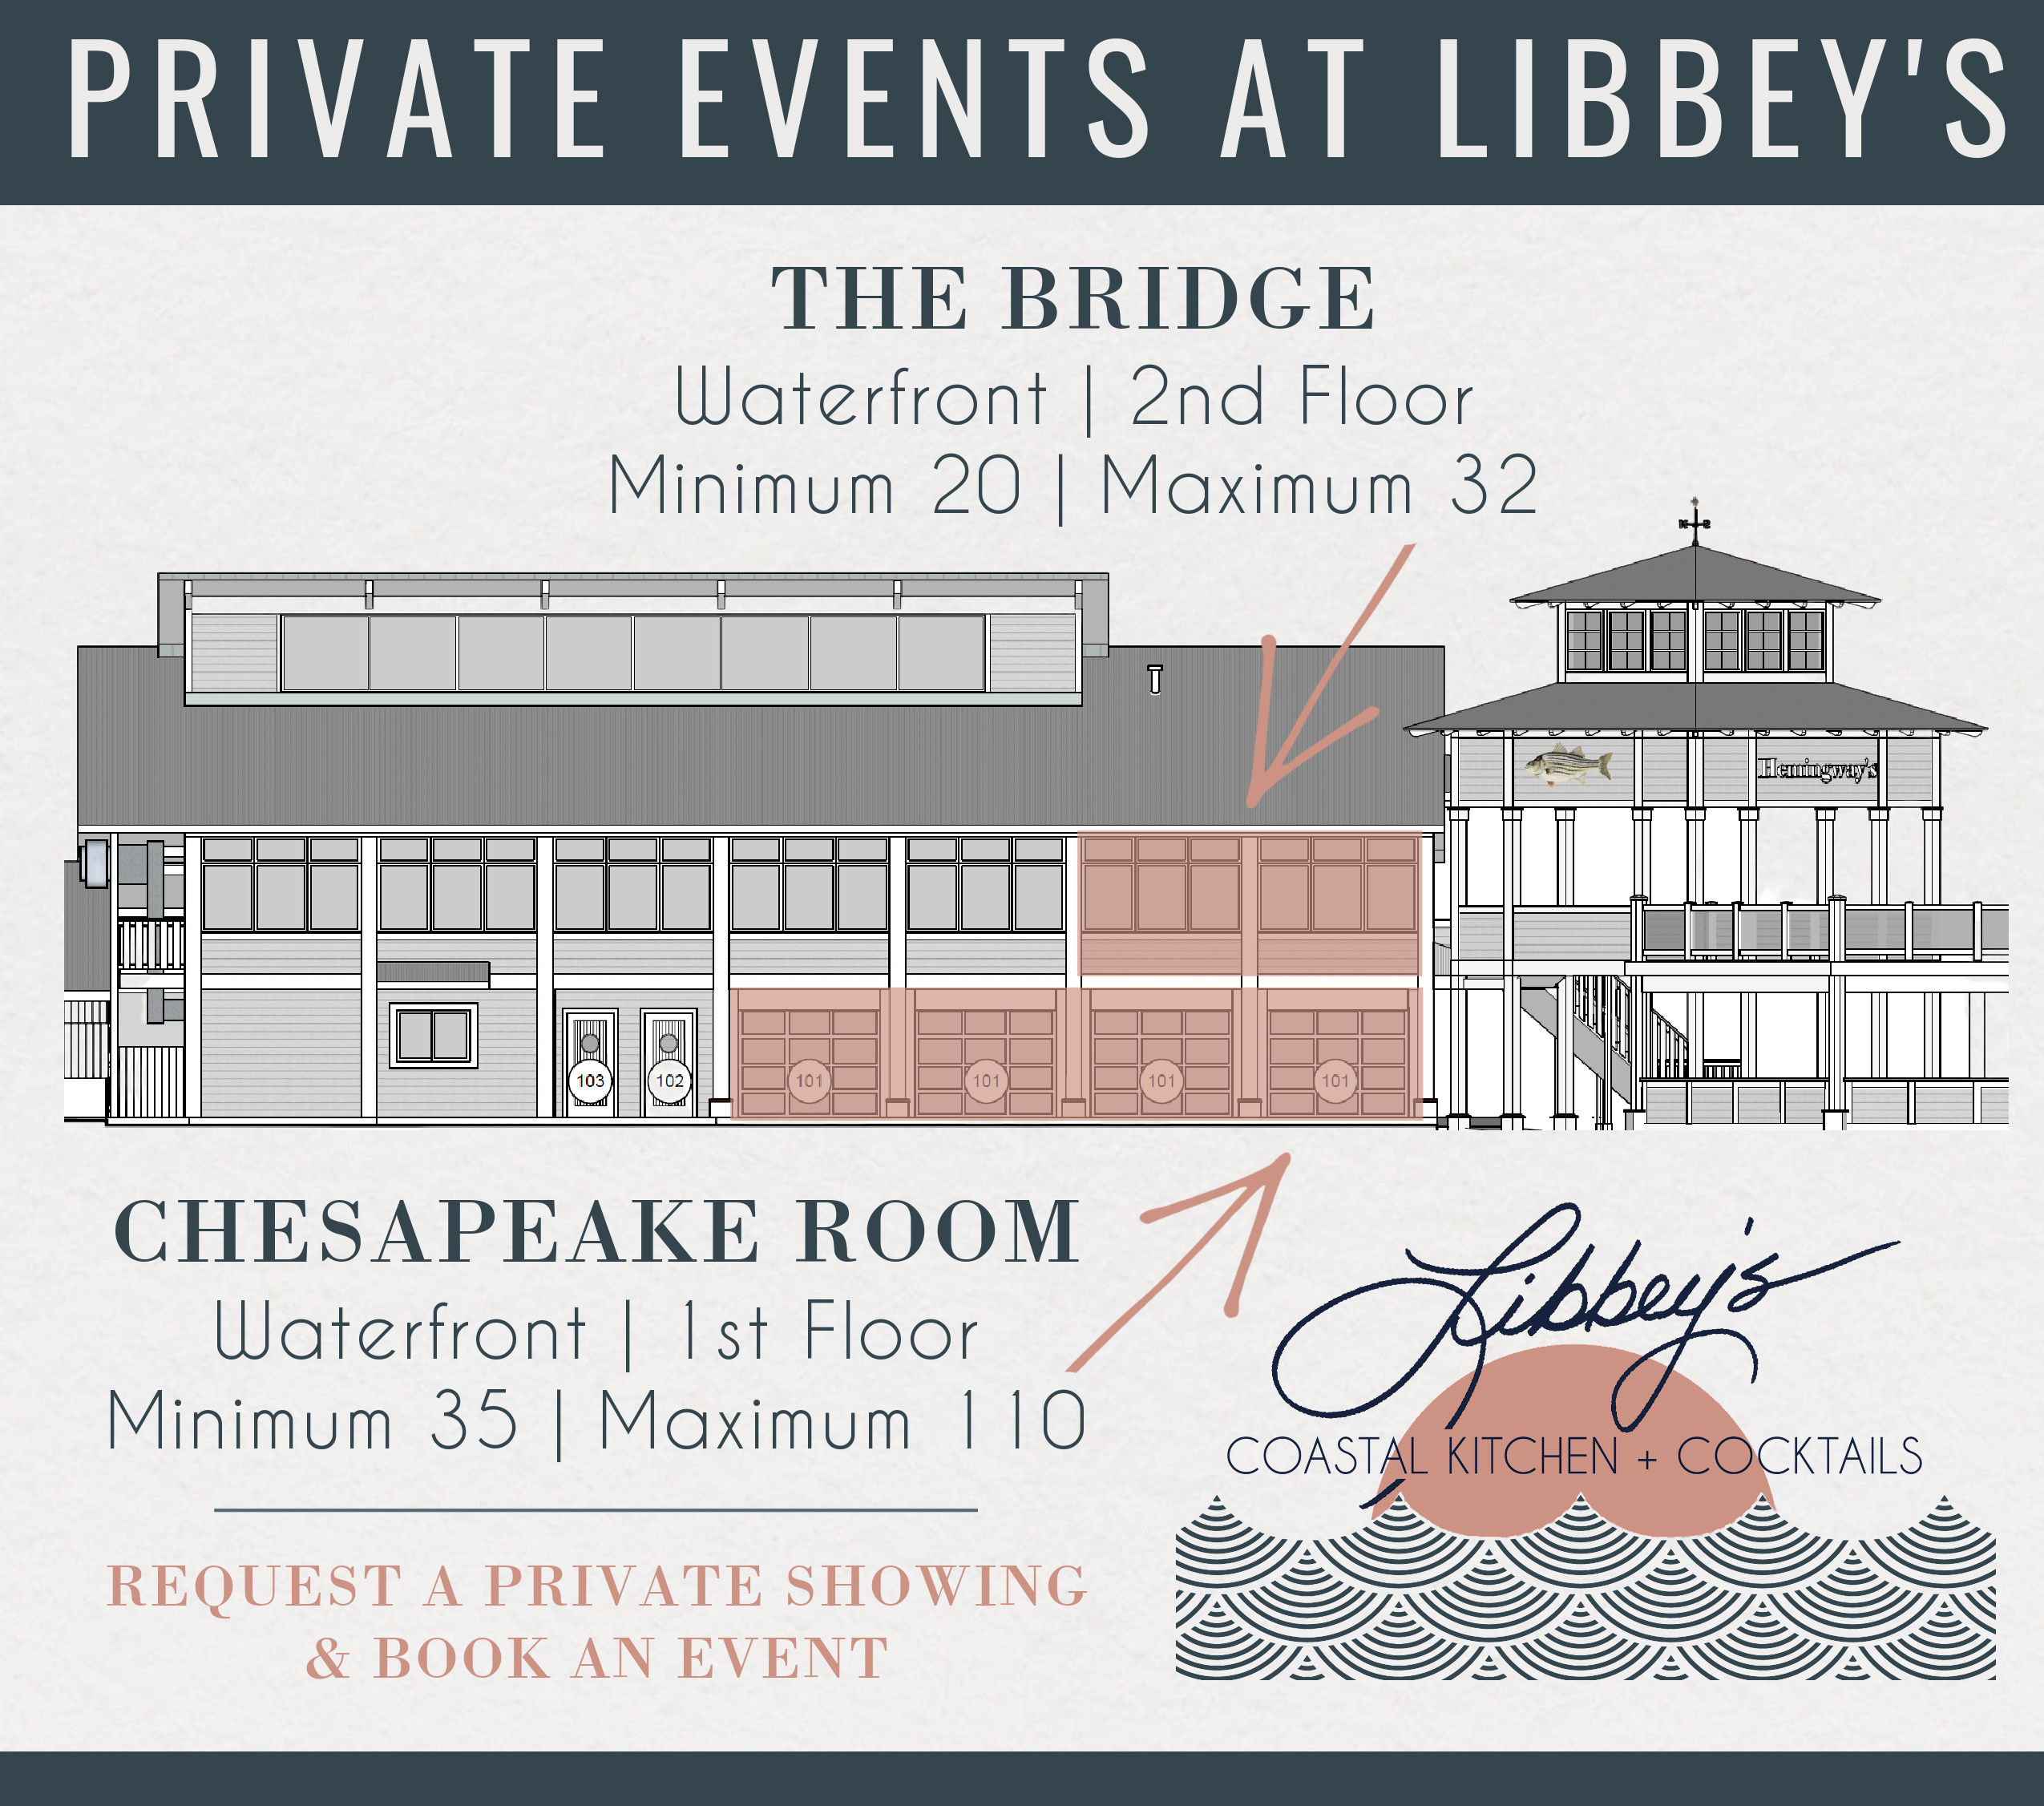 Libbey's Private Events